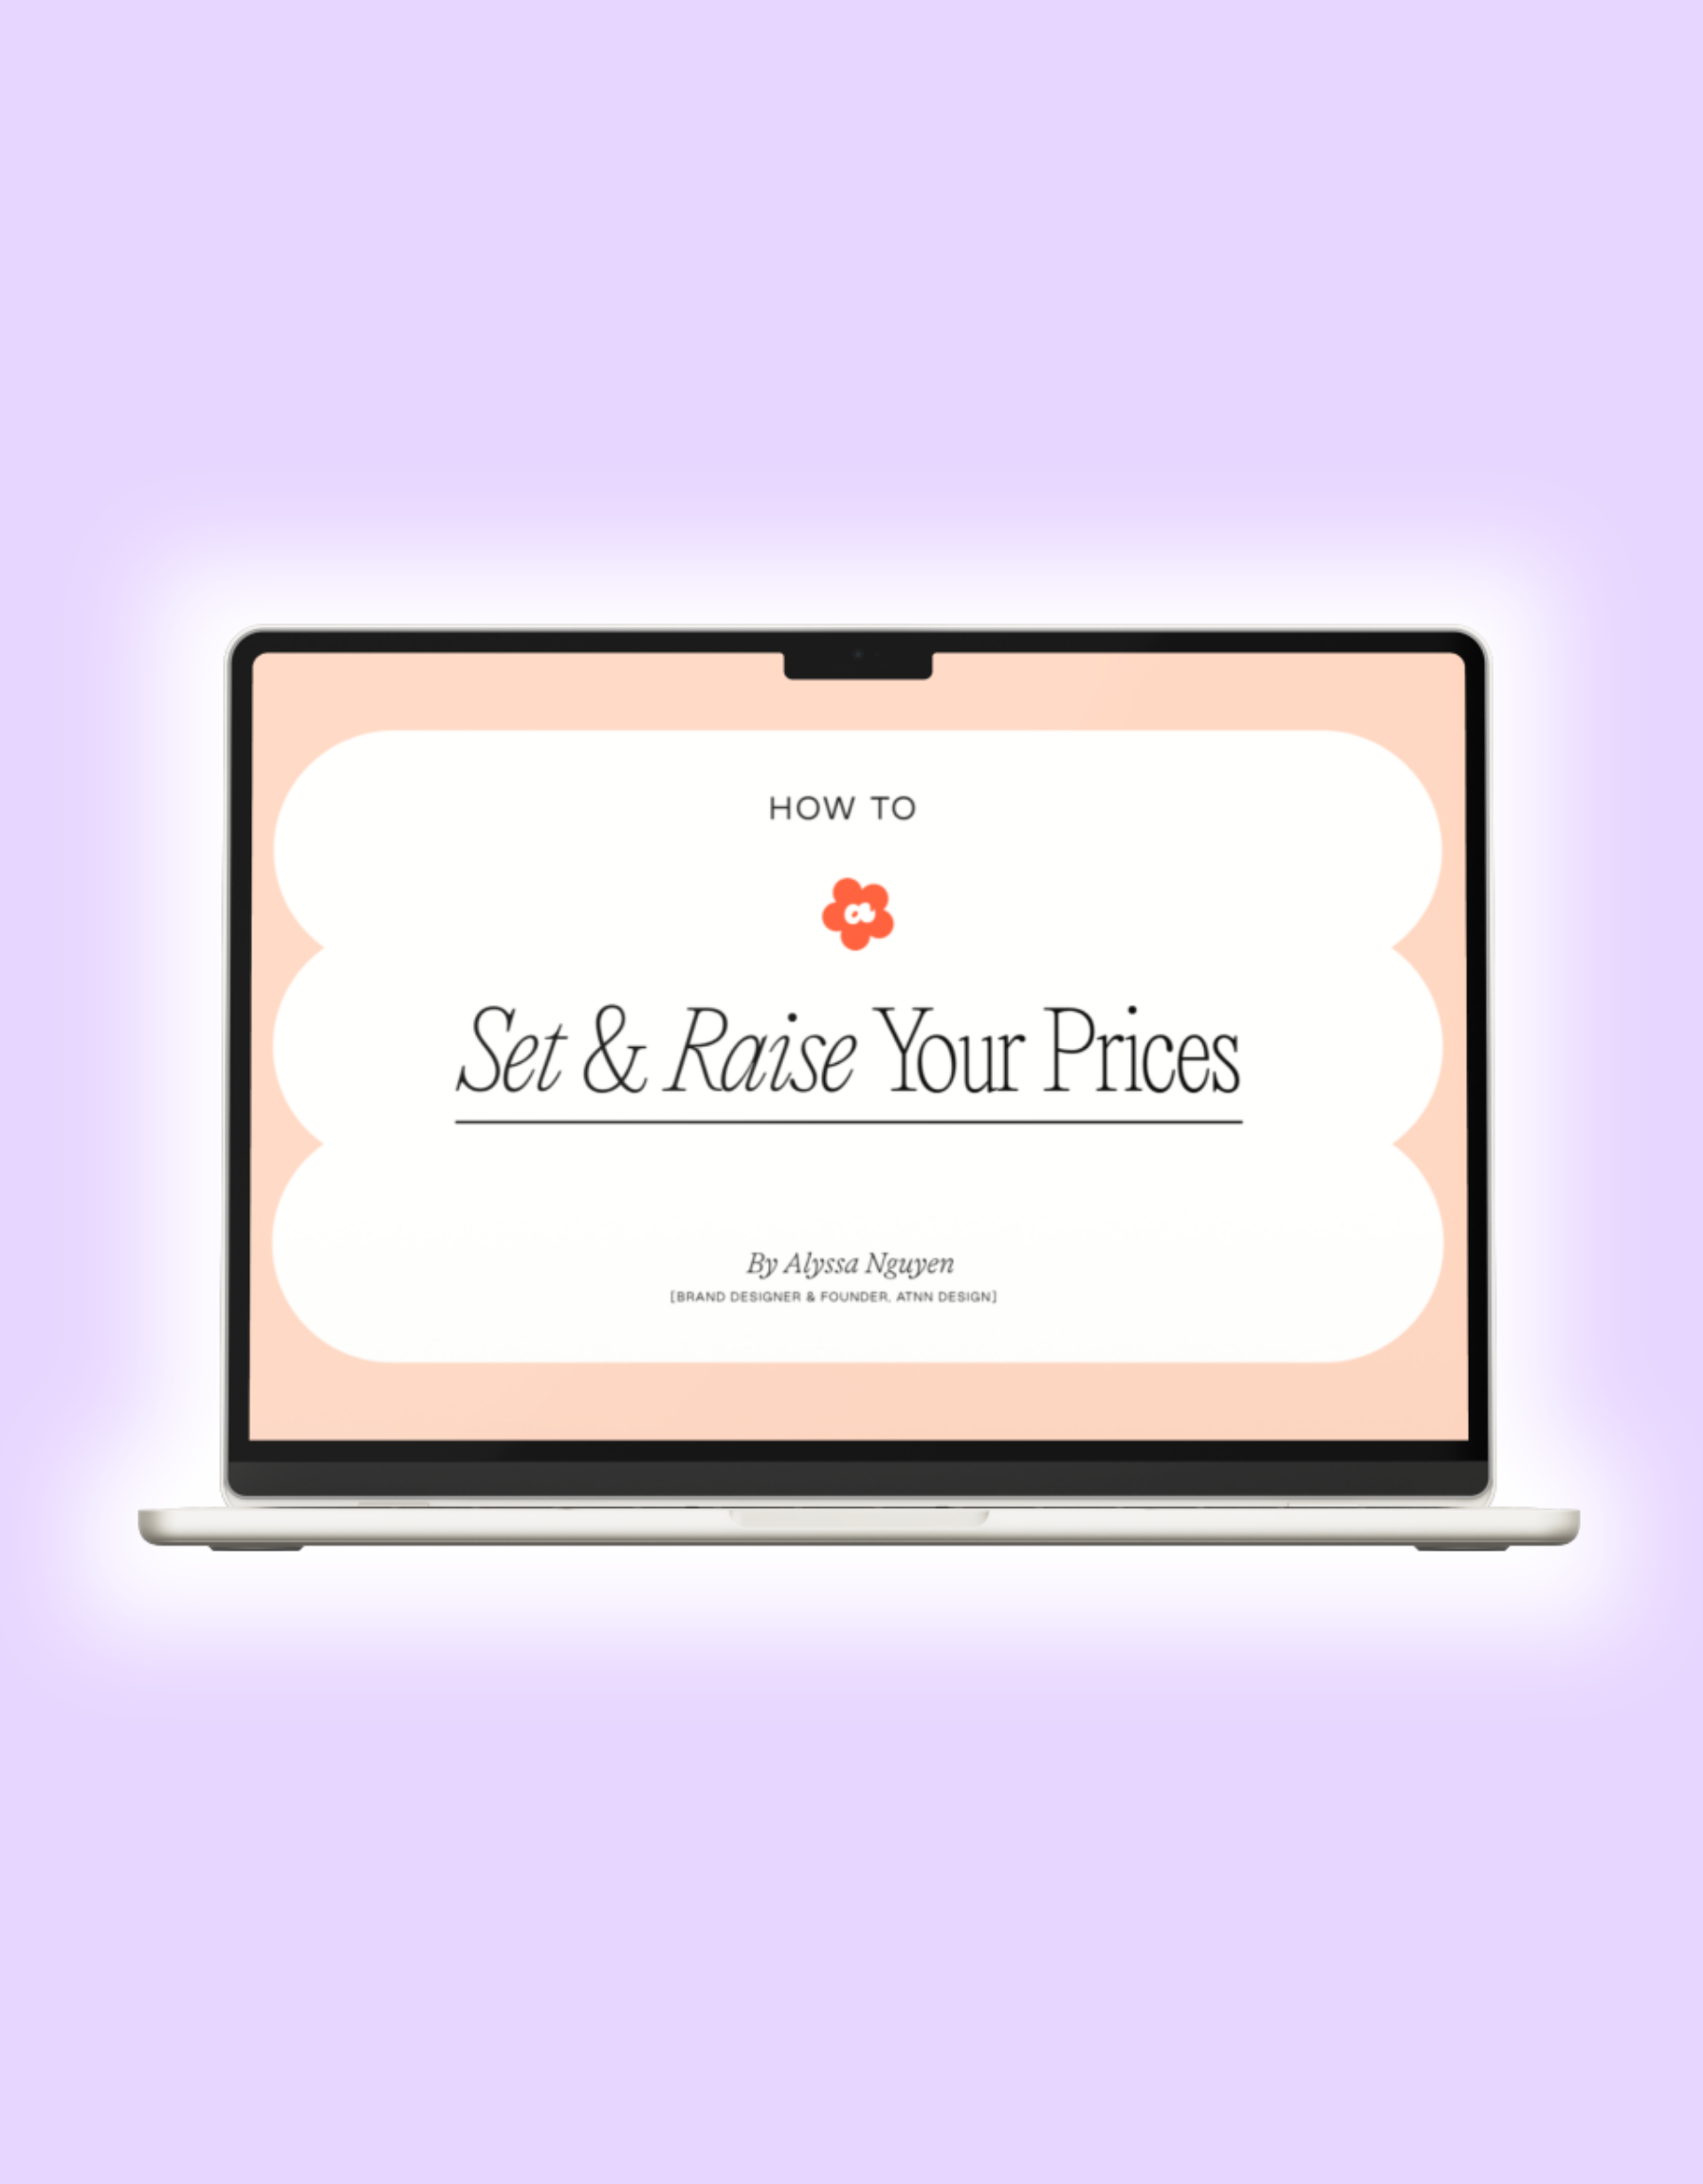 How to Set & Raise Your Prices Workshop